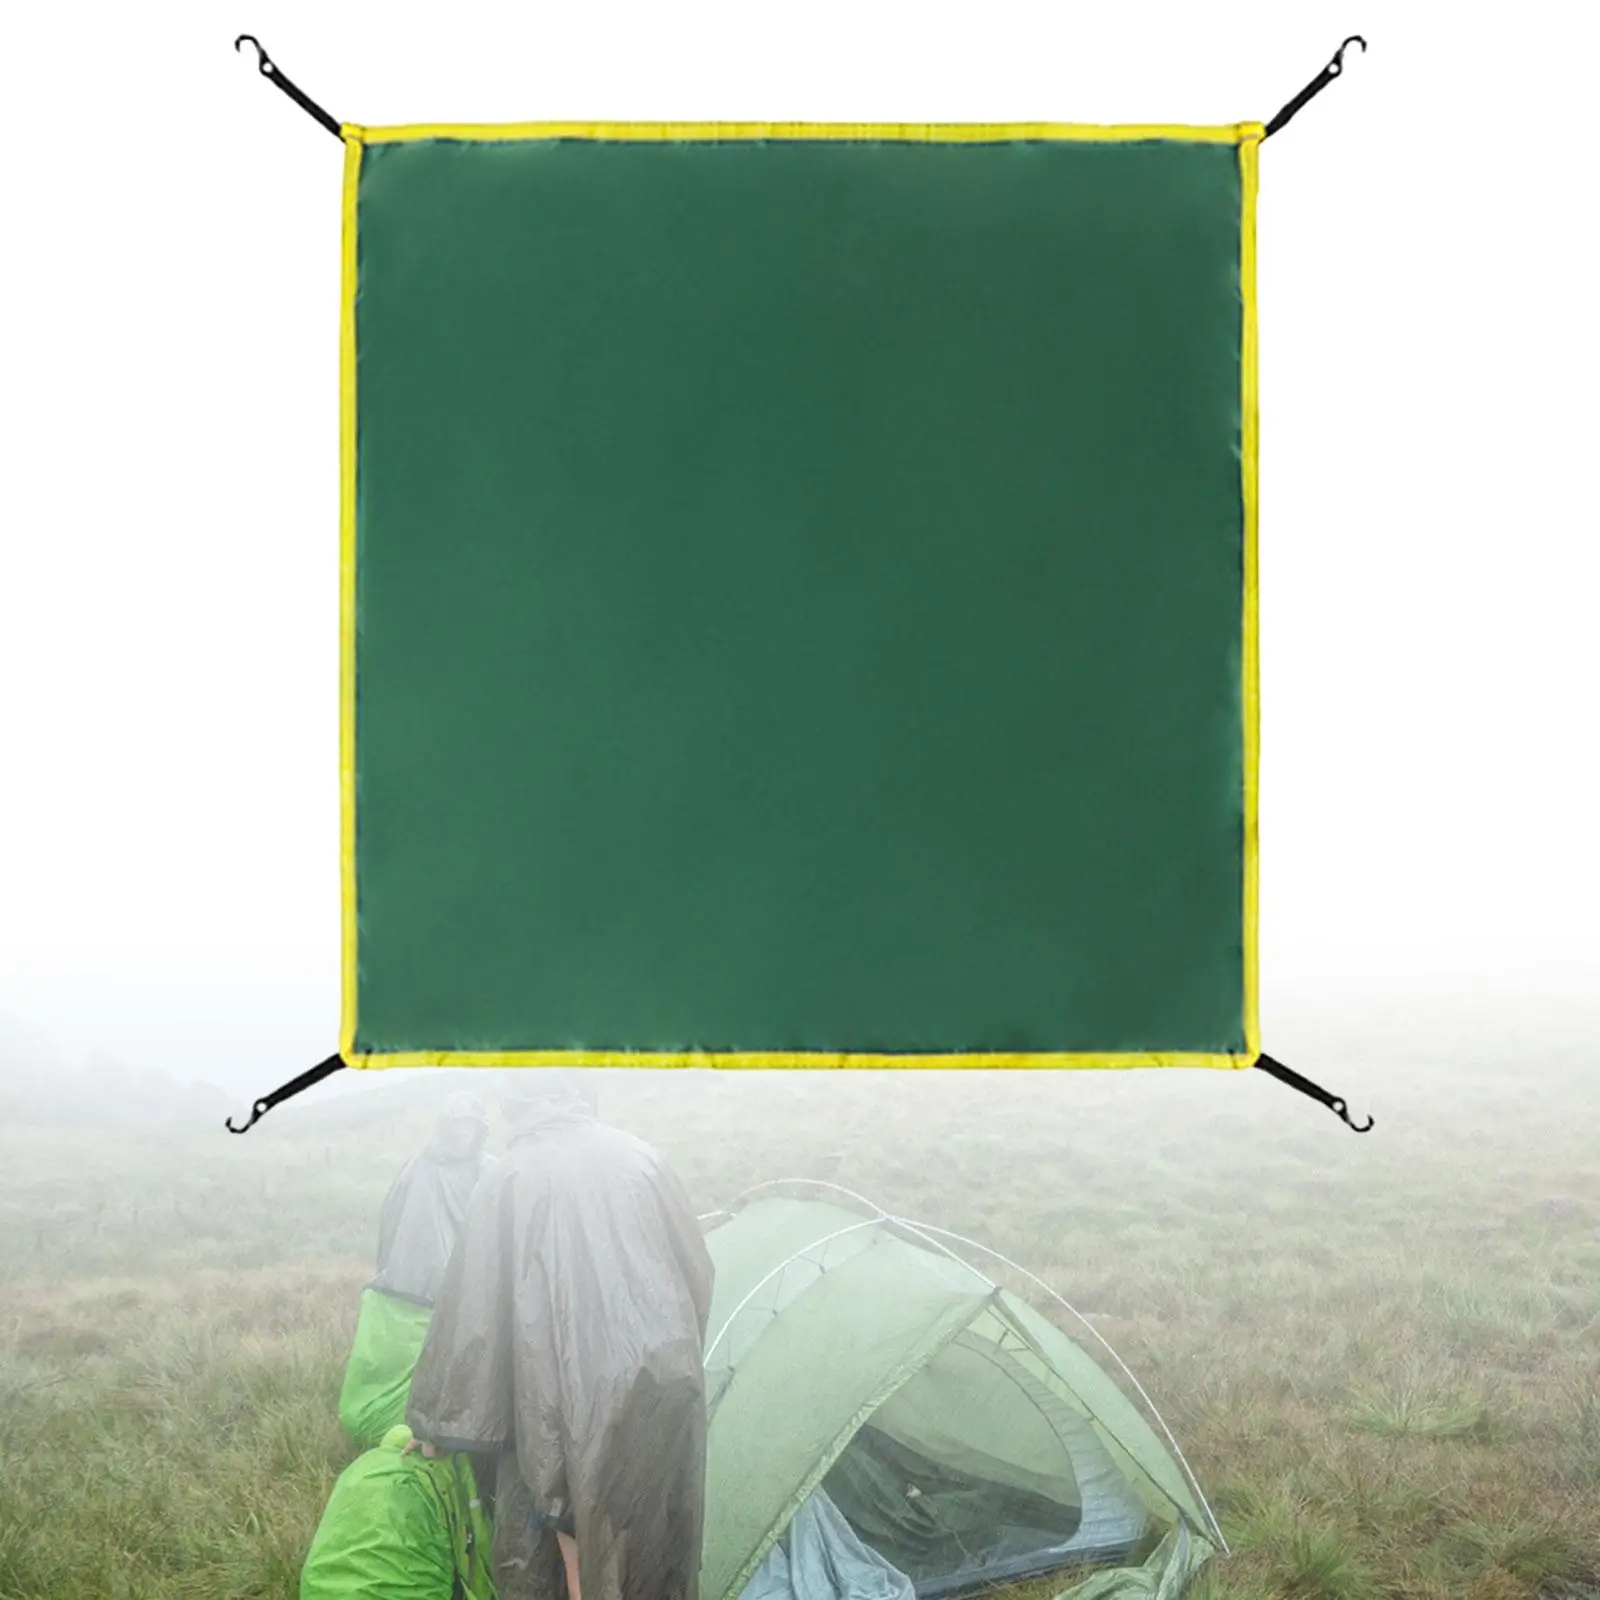 Rainfly Accessory Lightweight Fits 3-4 Person Automatic Tent Tent Top Cover Tarp for Backpacking Hiking Outdoor Supplies Travel